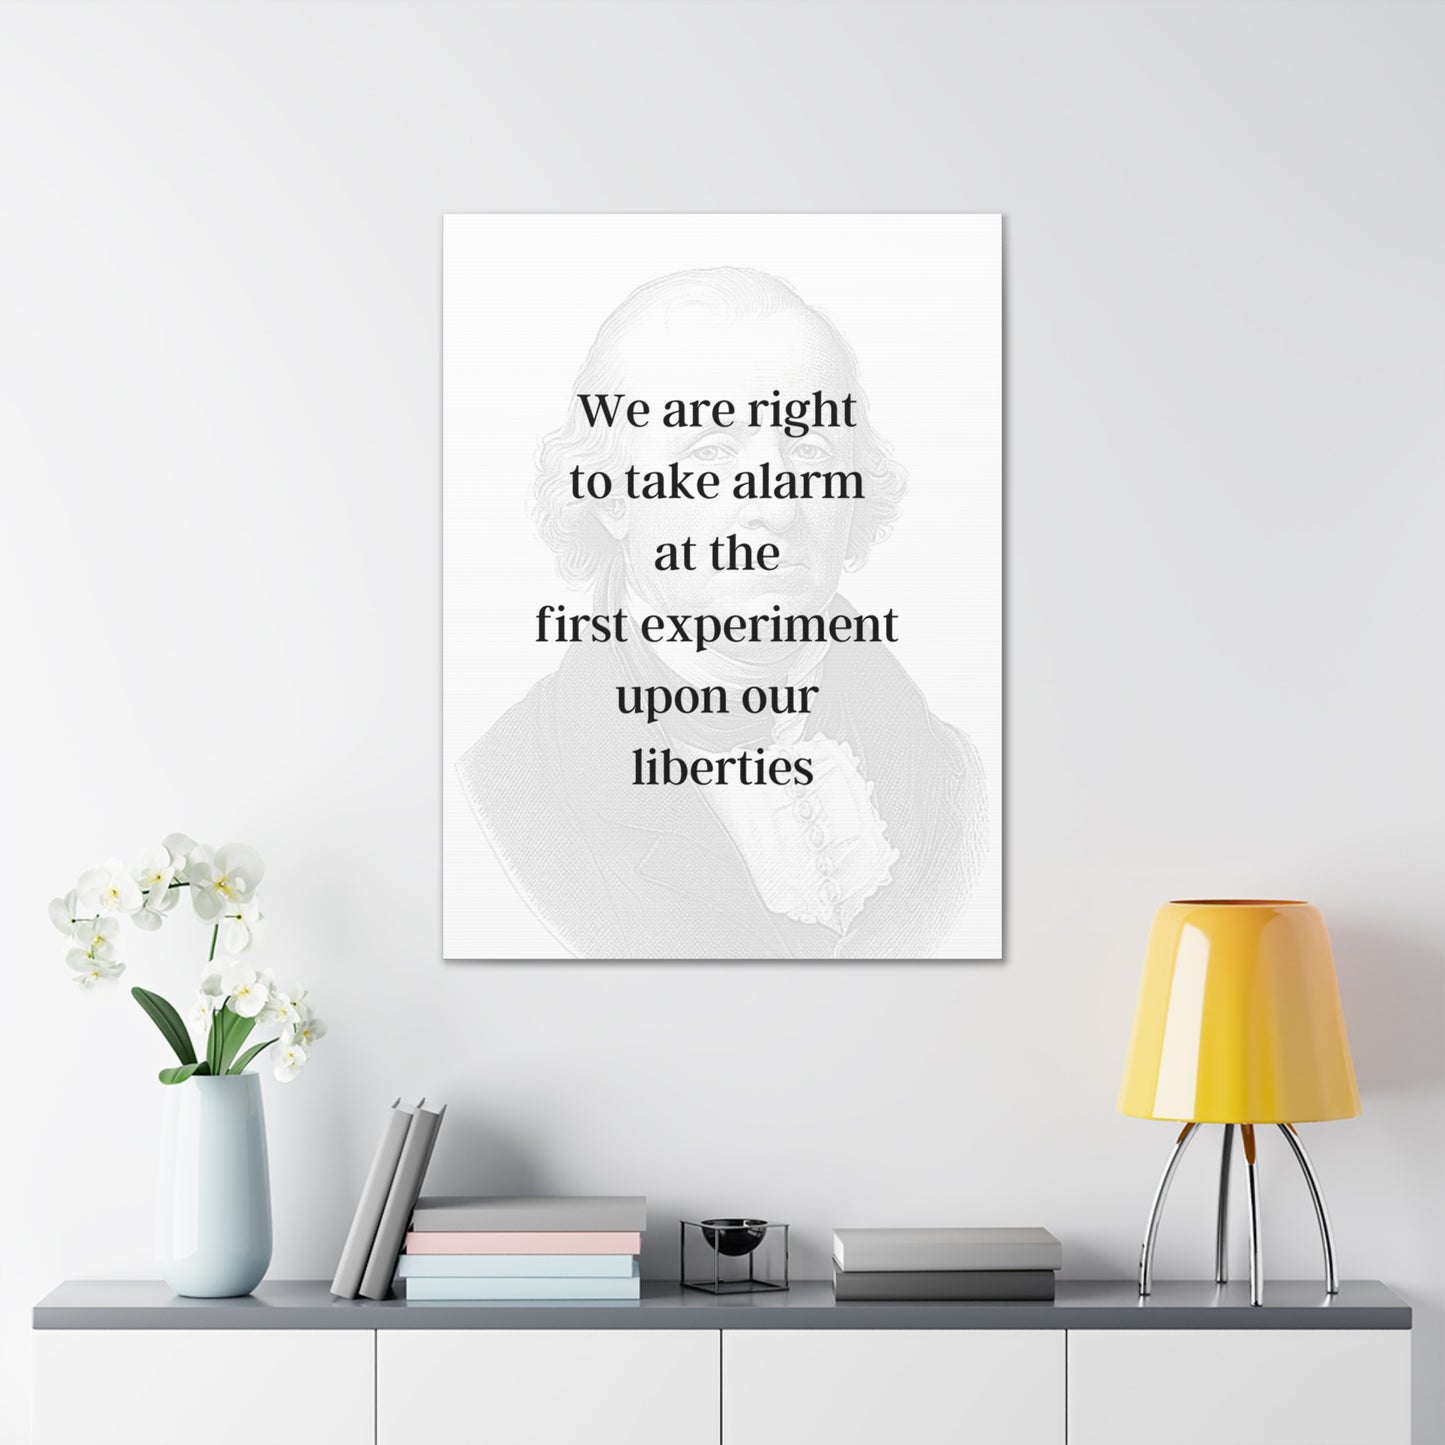 James Madison Quote 4, Canvas Art, Light Print, 4th President of the United States, American Patriots, AI Art, Political Art, Canvas Prints, Presidential Portraits, Presidential Quotes, Inspirational Quotes